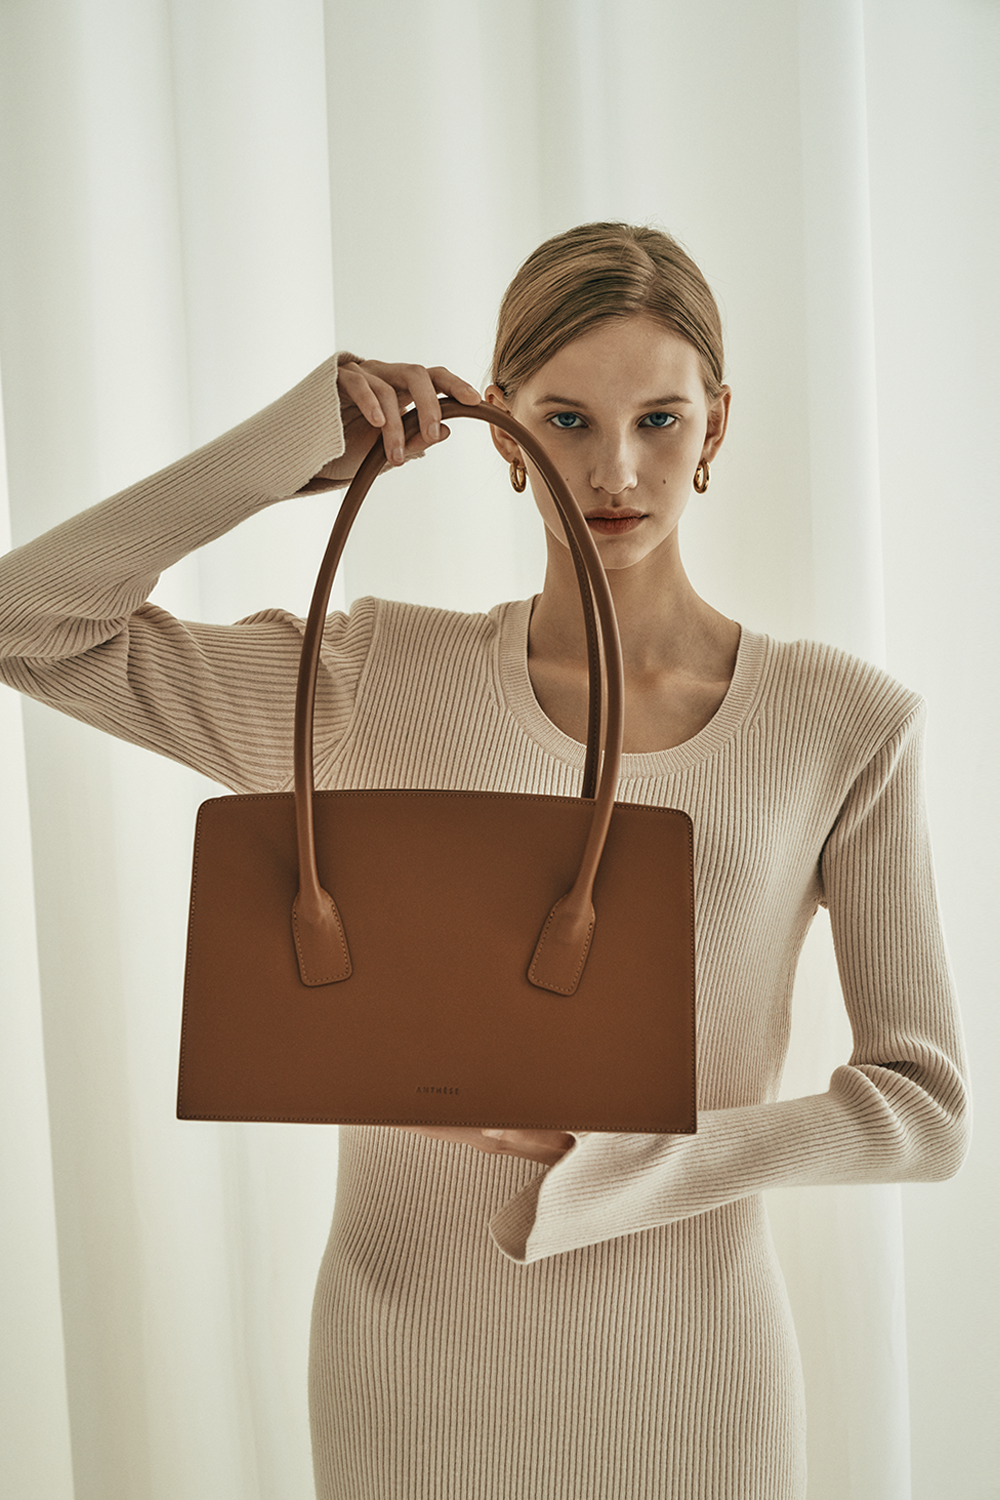 ANTHÈSE Feuille classic bag, salted caramel